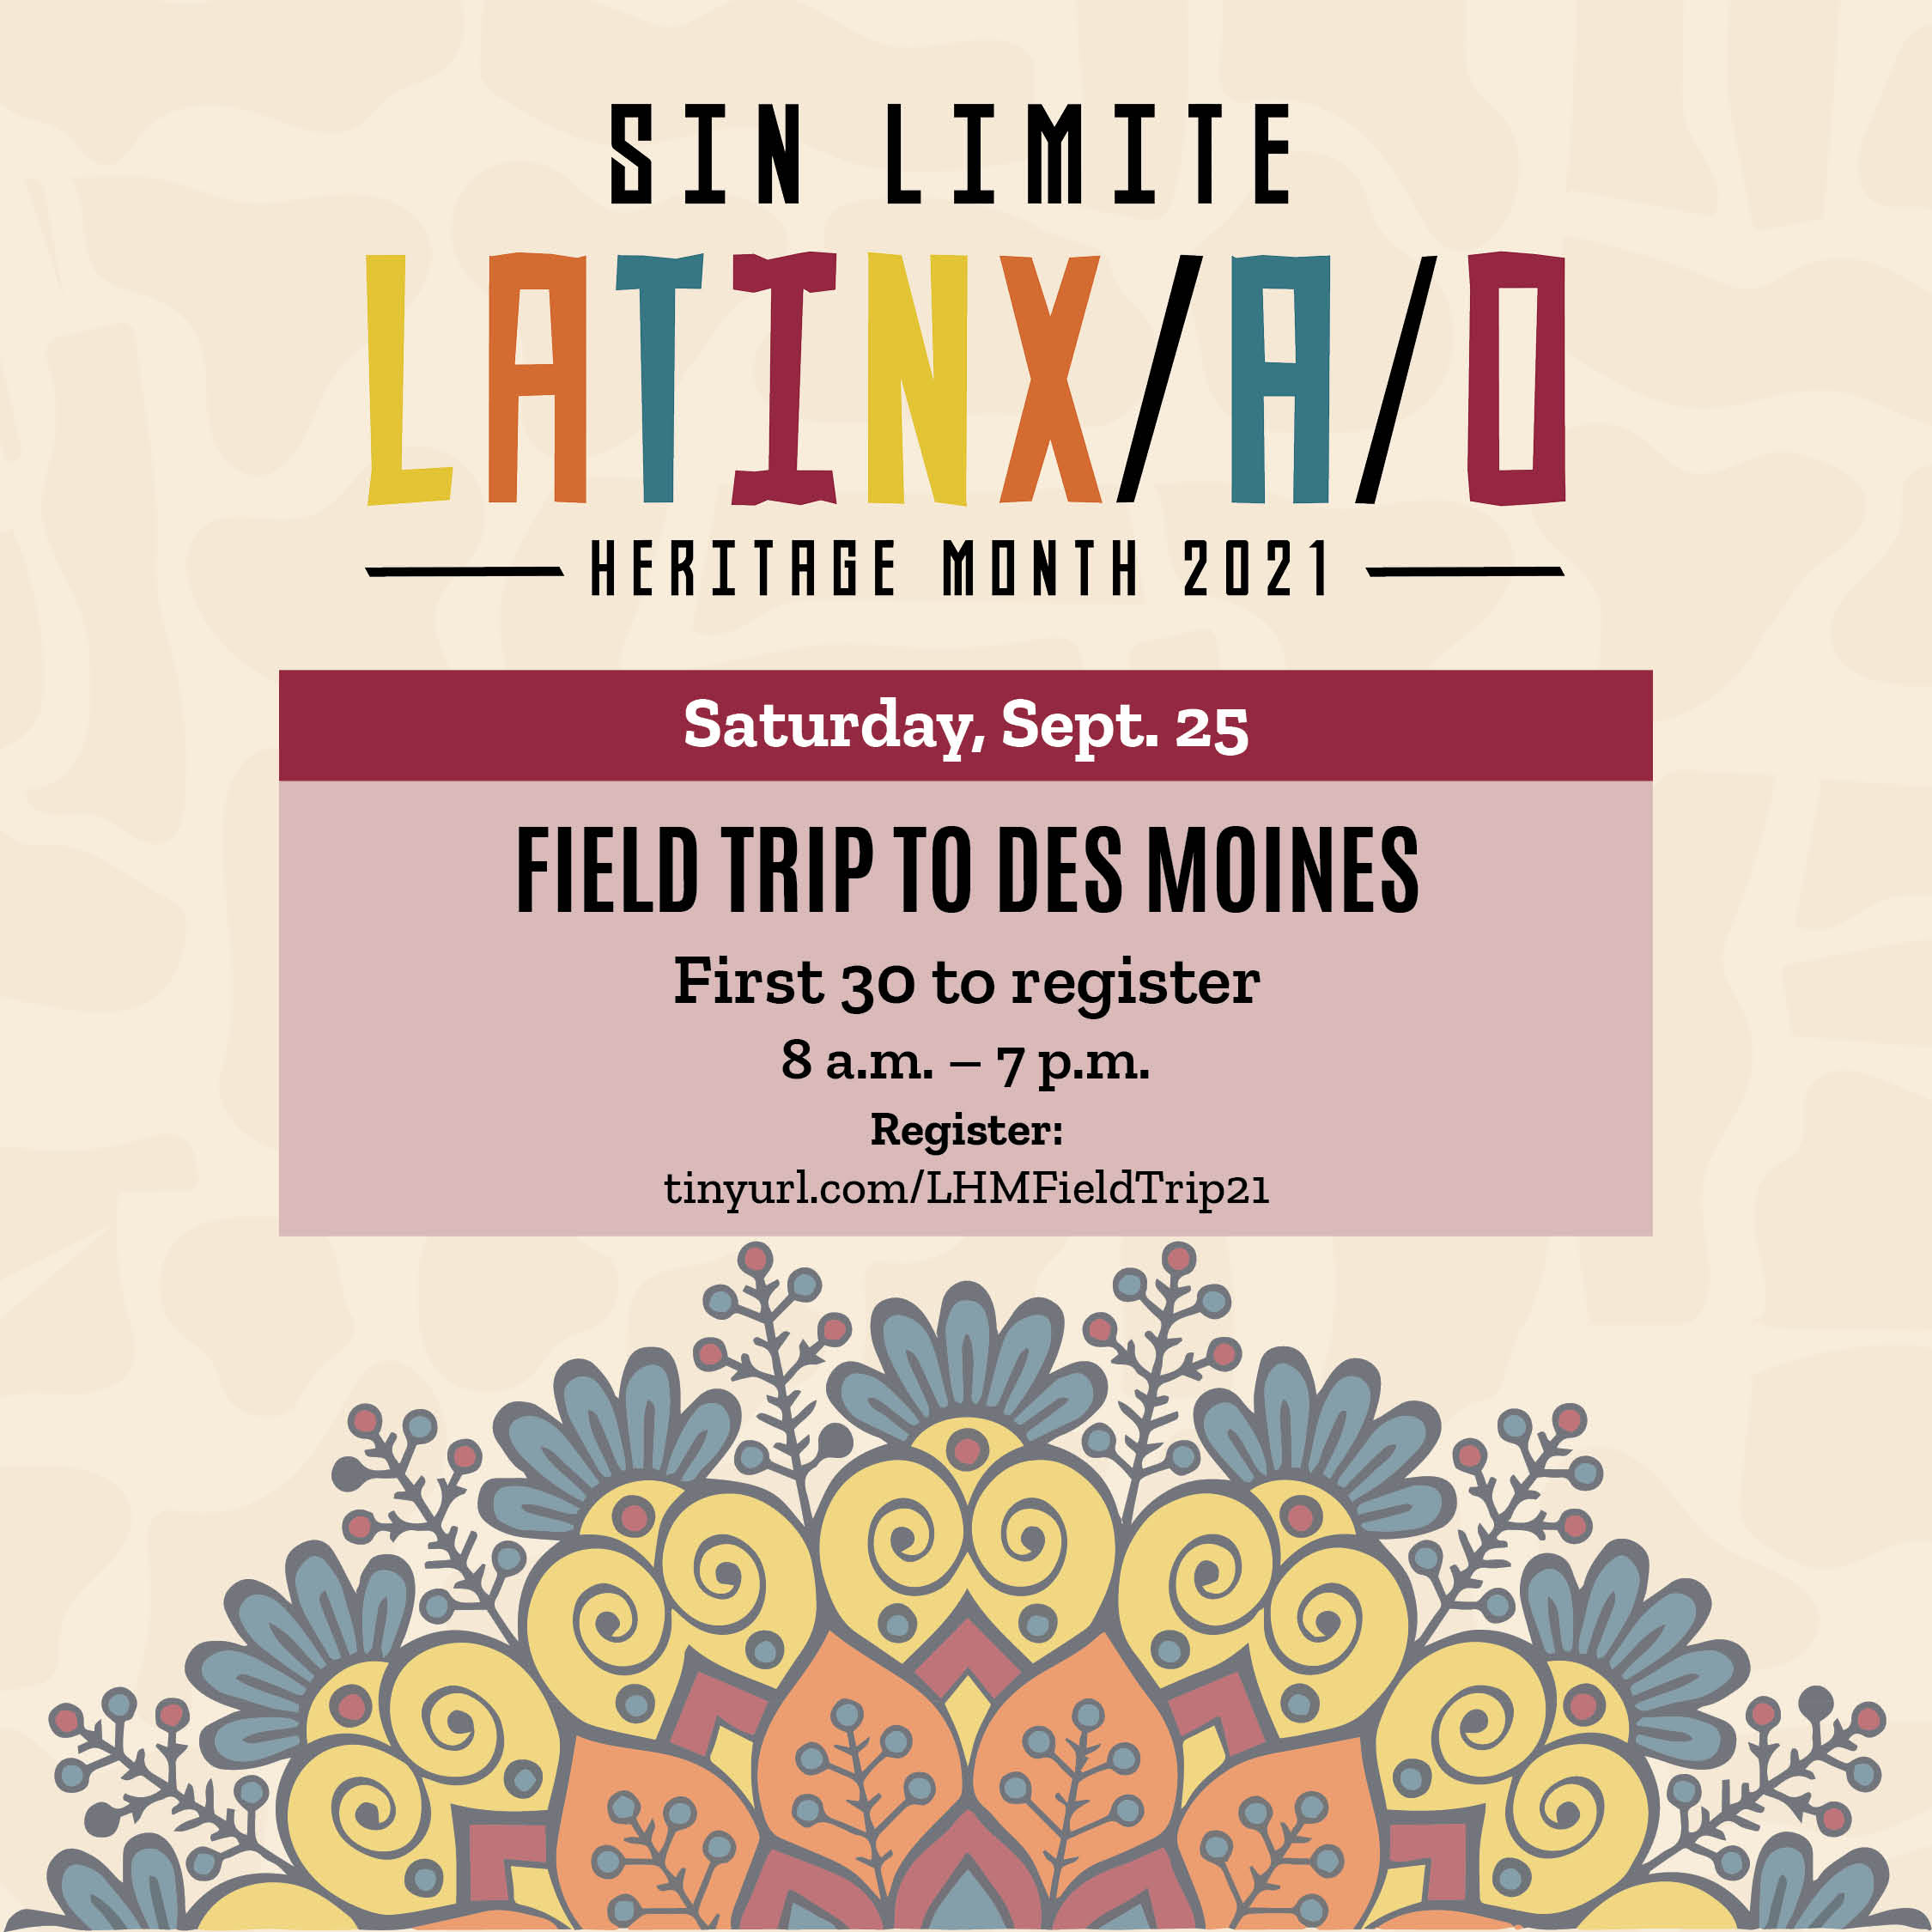 A graphic with floral design and text that says 'SIN LIMITE LATINX/A/O HERITAGE MONTH 2021 Saturday Sept. 25 FIELD TRIP TO DES MOINES First 30 to register 8 a.m. p.m. Register: tinyurl.com/LHMFieldTrip21'